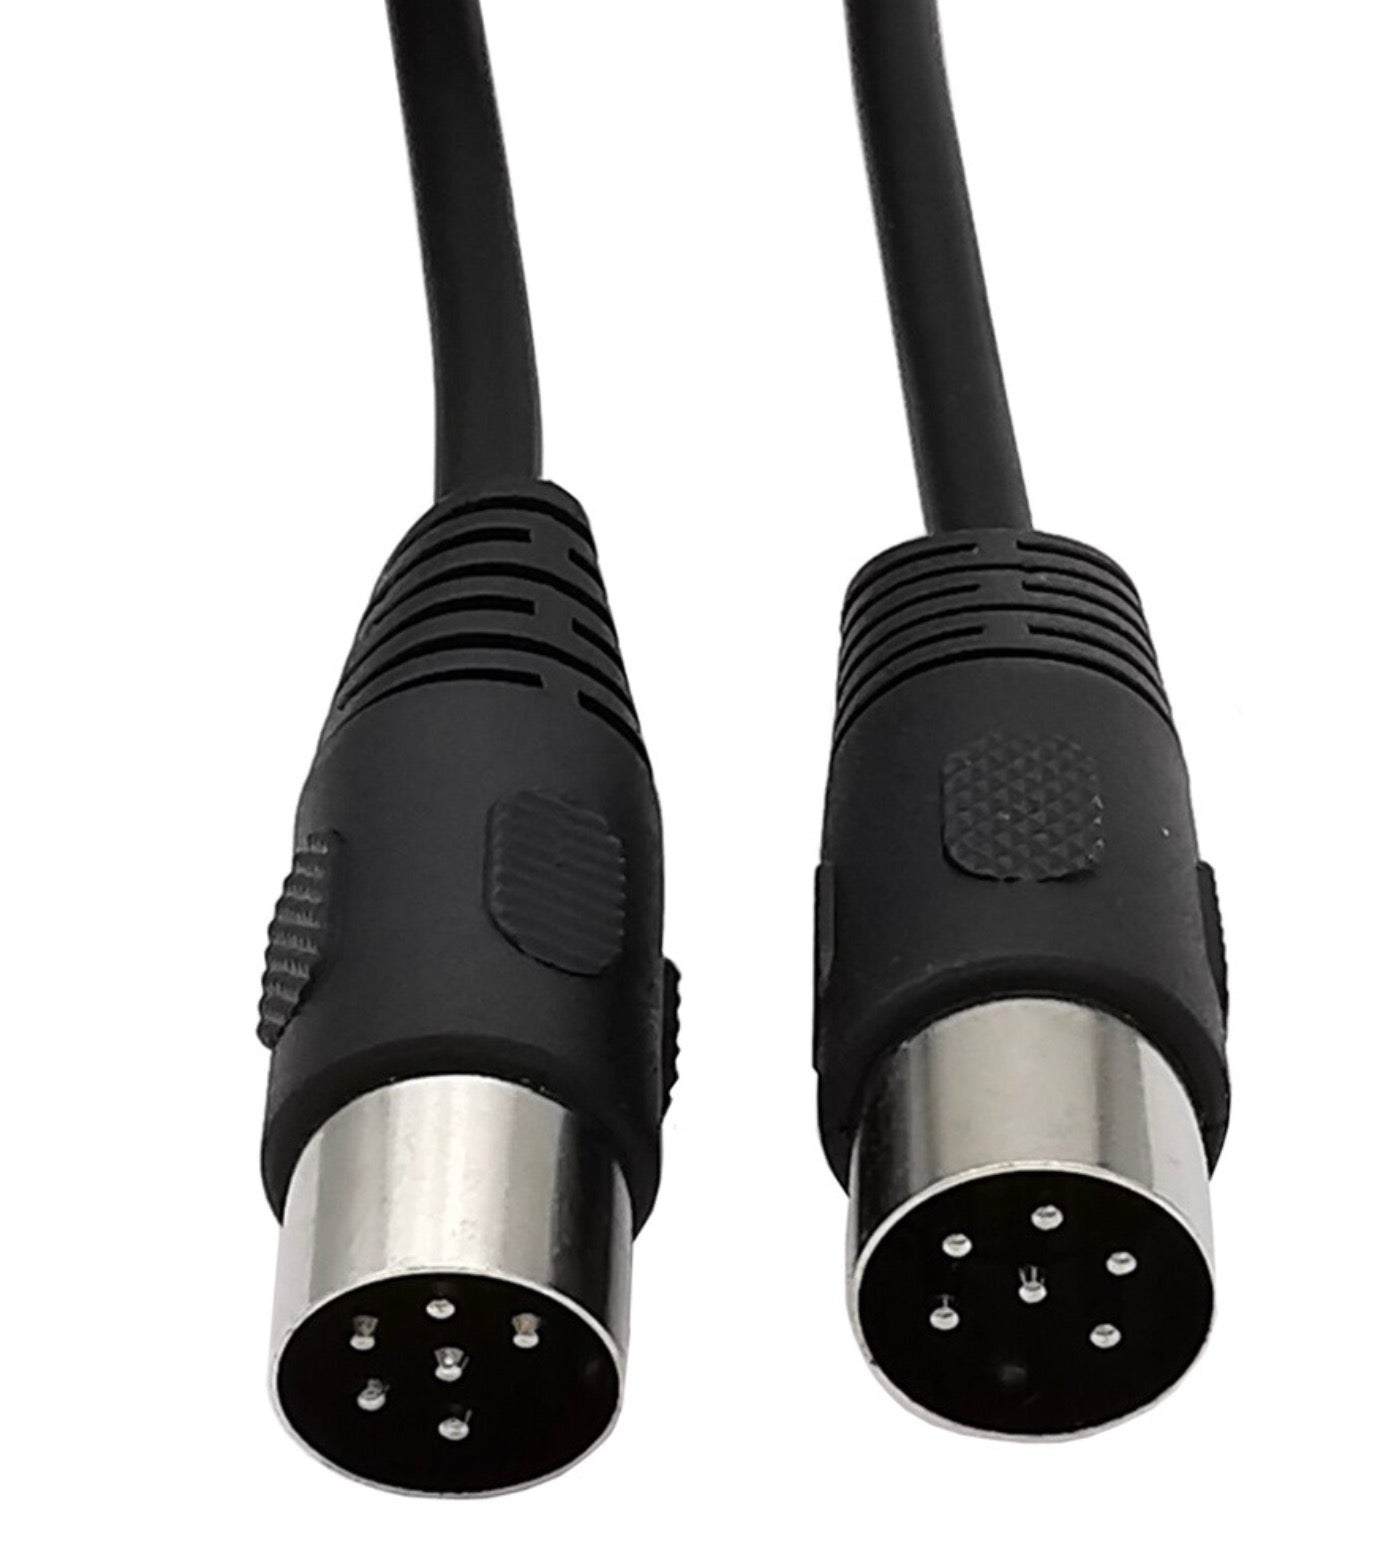 6-Pin Din Male to Male Audio Cable for Digital Audio Devices